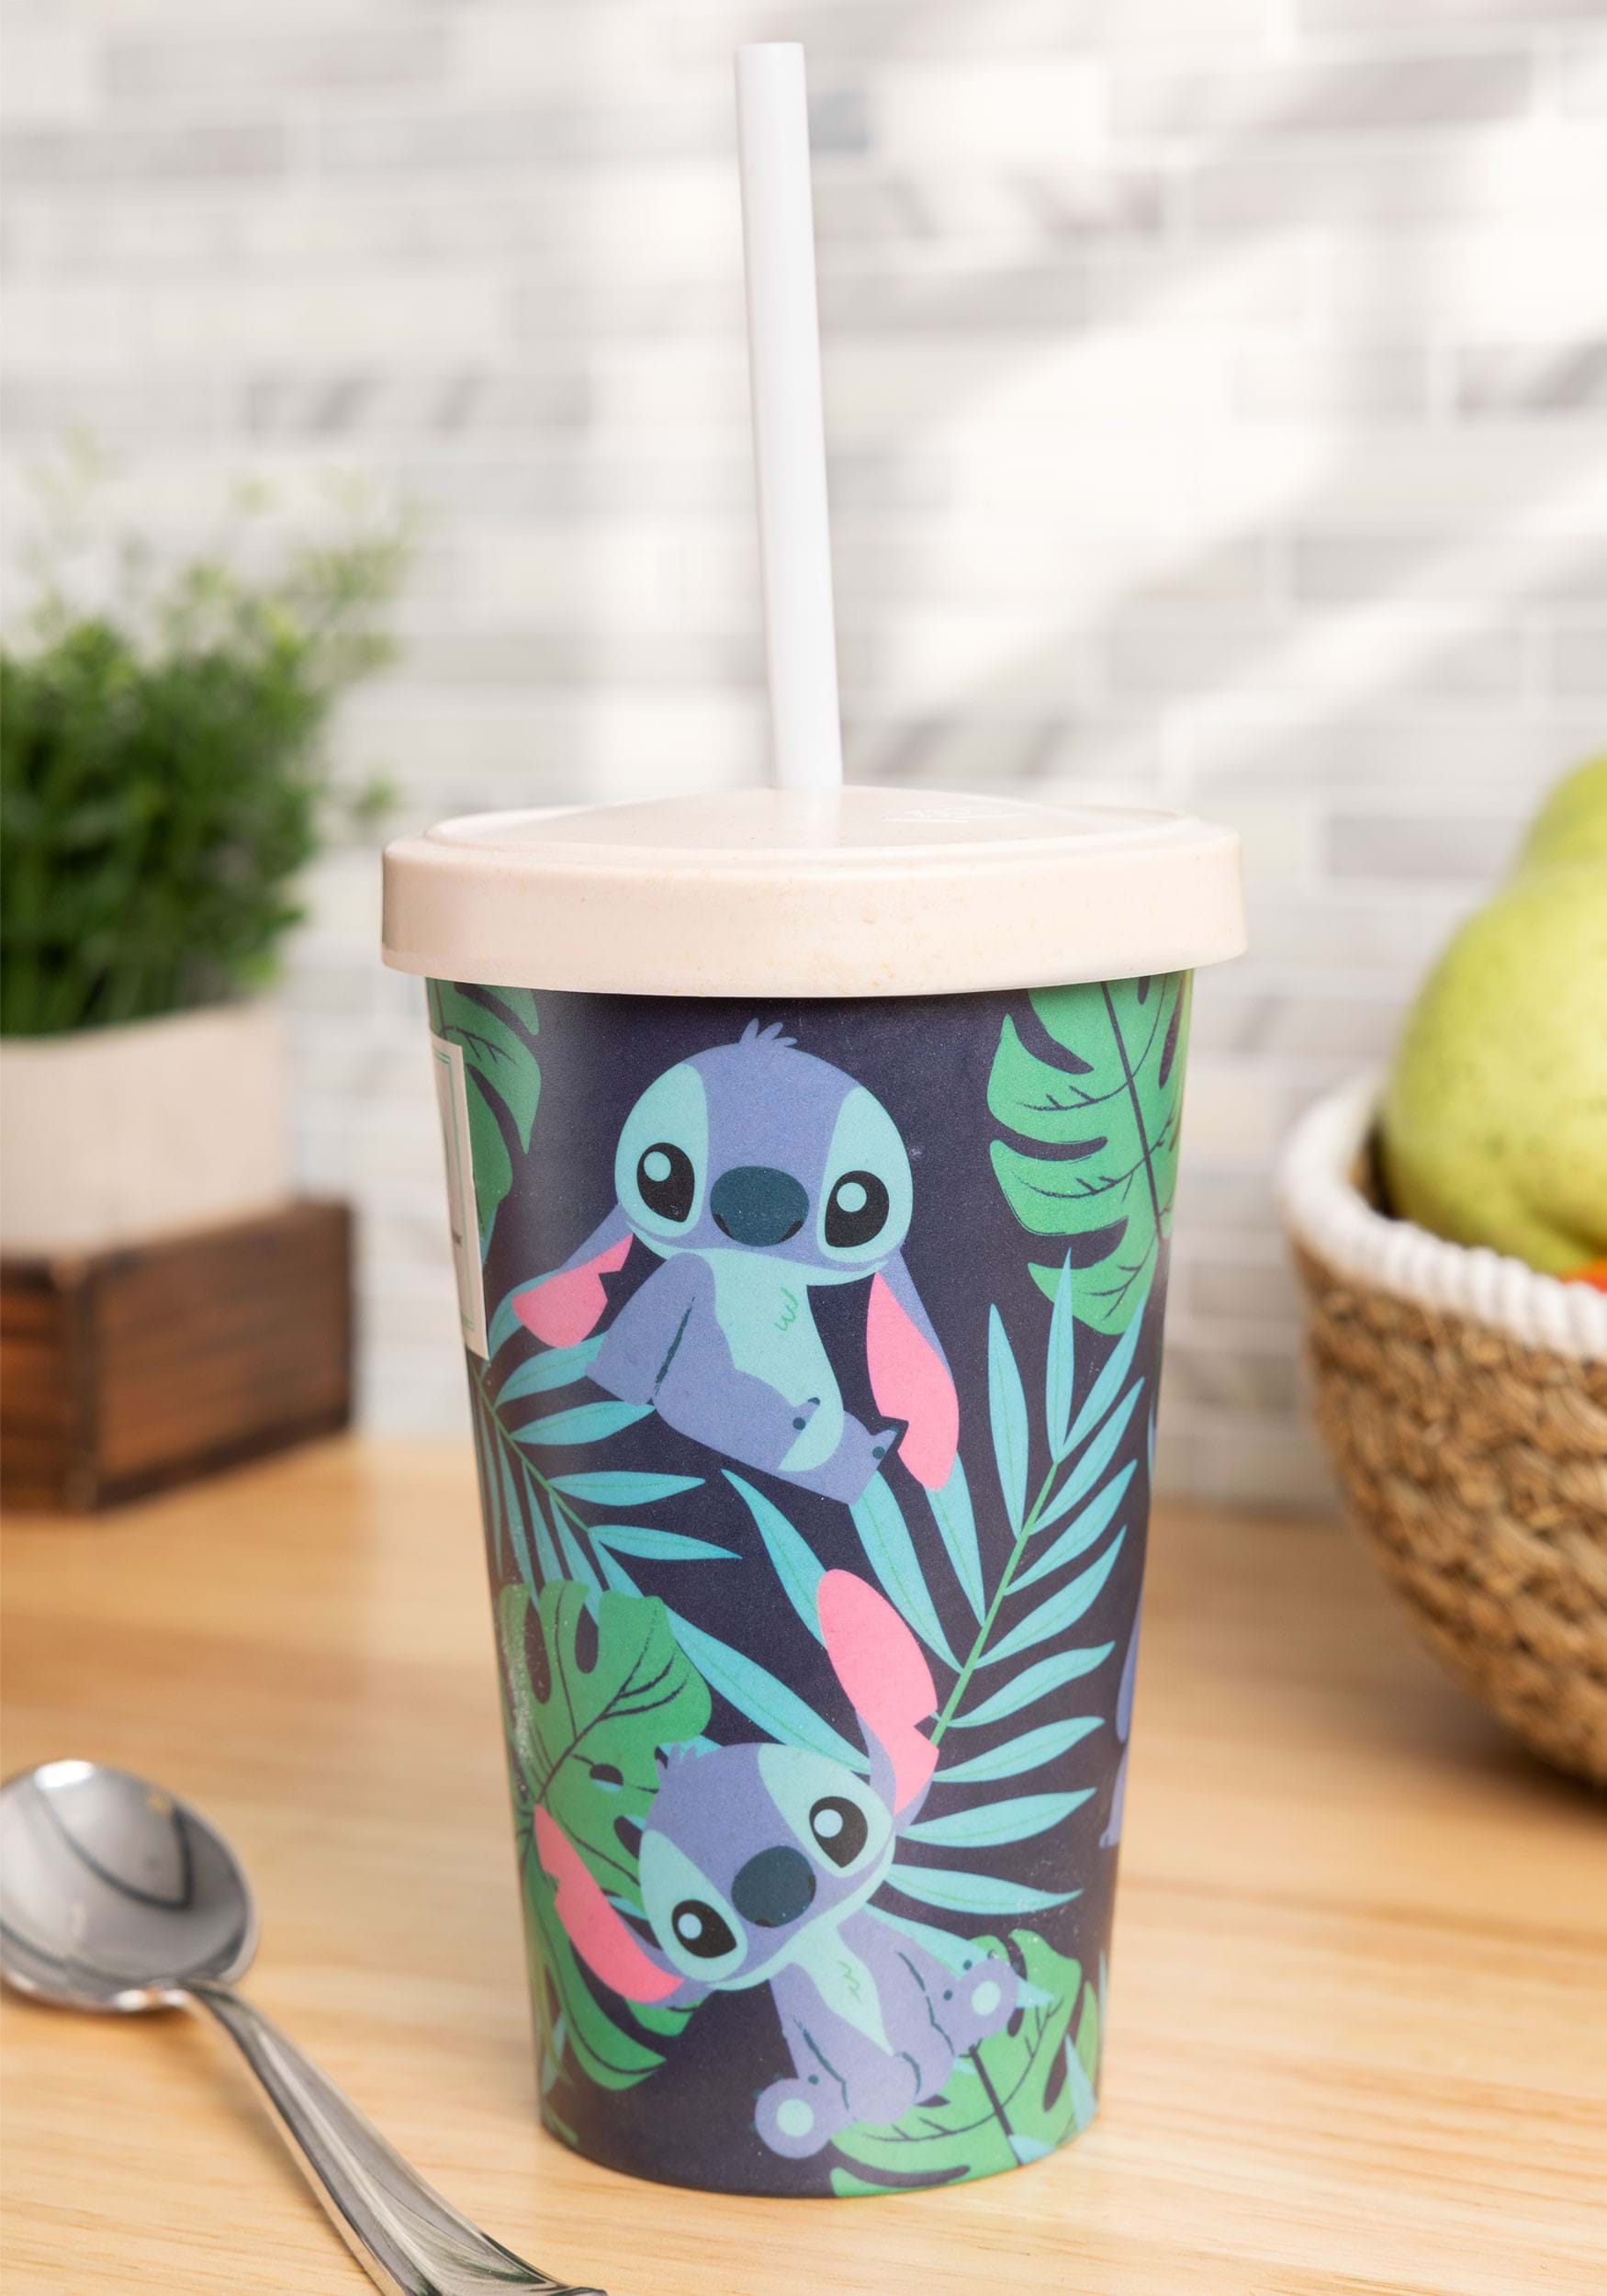 https://images.fun.com/products/84040/1-1/disney-stitch-bamboo-tumbler-with-straw-lid.jpg